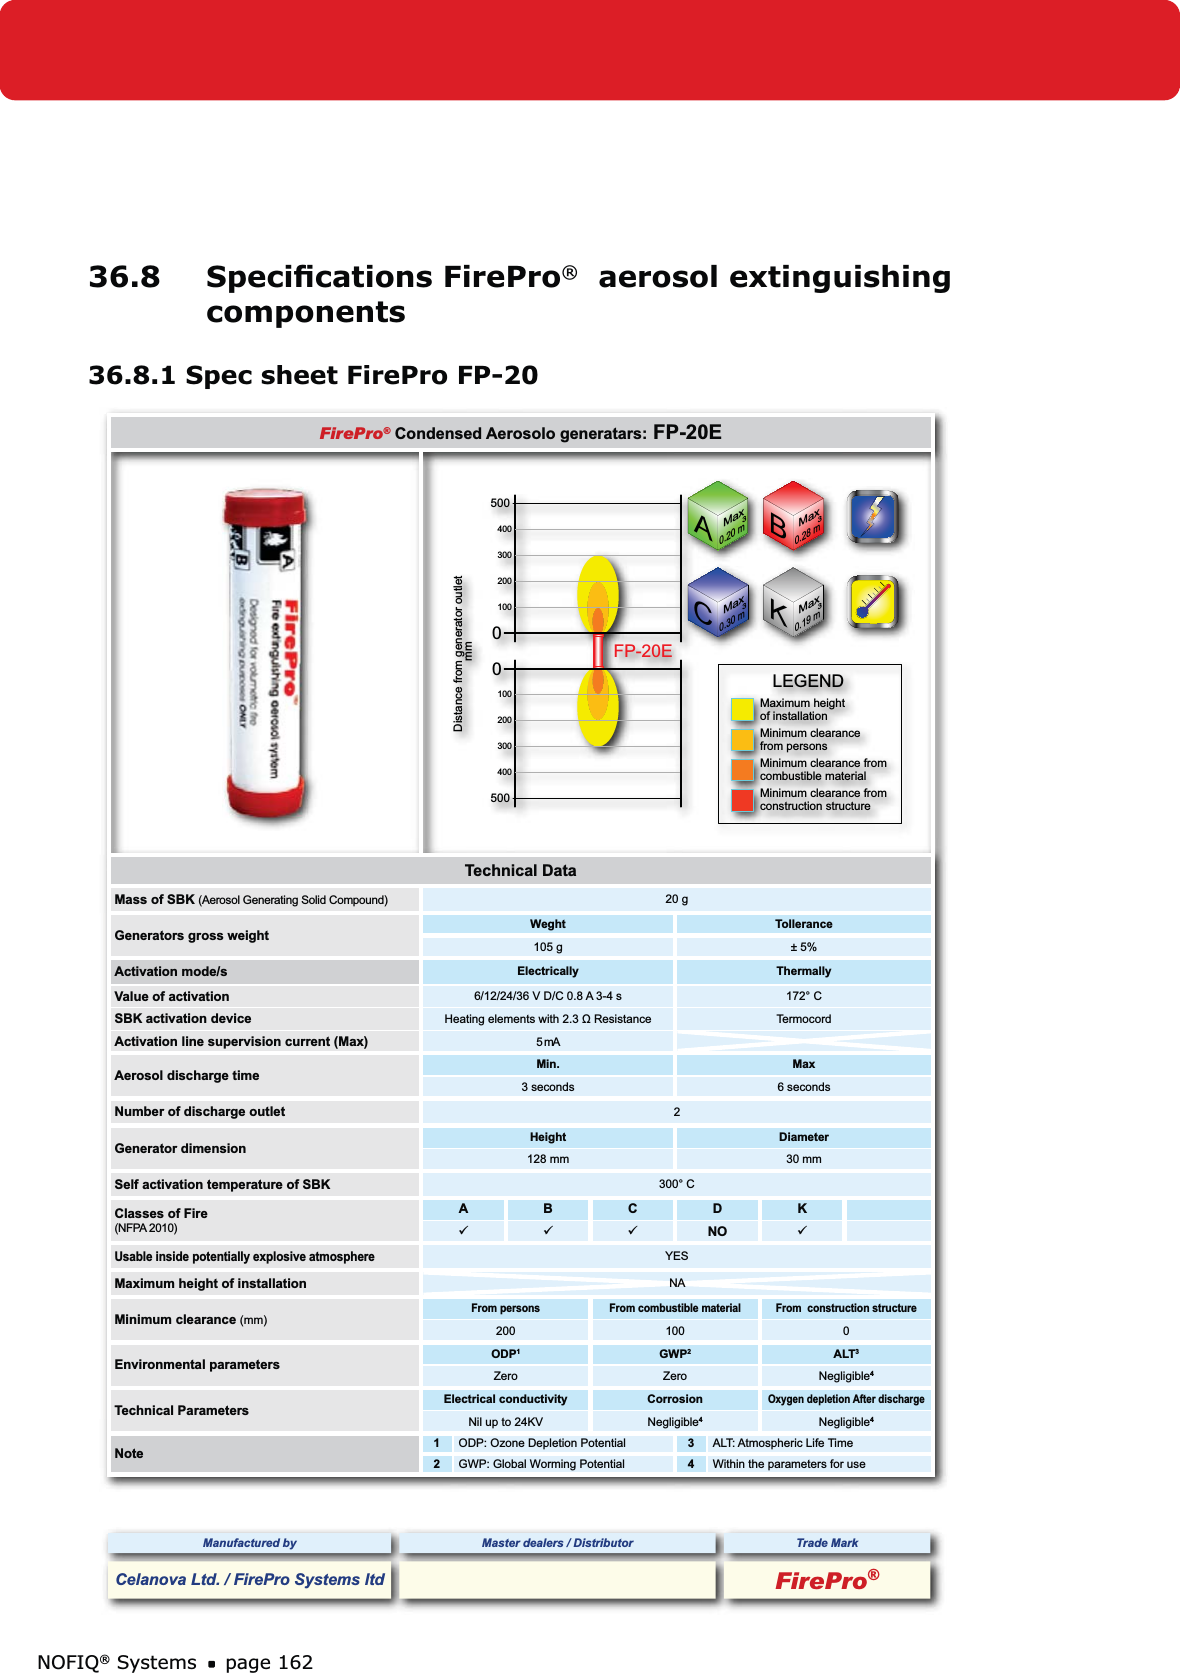 NOFIQ® Systems page 16236.8 Speciﬁcations FirePro®  aerosol extinguishing components36.8.1 Spec sheet FirePro FP-20Manufactured by Master dealers / Distributor Trade MarkCelanova Ltd. / FirePro Systems ltd FirePro®FirePro® Condensed Aerosolo generatars: FP-20EFP-20E400300200100Distance from generator outletmm0500 Minimum clearance fromMaximum heightMinimum clearance fromMinimum clearanceLEGENDof installationconstruction structurecombustible materialfrom persons4003002001000500BMaxCMaxAMax0.30 m30.28 m30.20 m3KMax0.19 m3Technical DataMass of SBK (Aerosol Generating Solid Compound) 20 gGenerators gross weight Weght Tollerance105 g ± 5%Activation mode/s Electrically ThermallyValue of activation 6/12/24/36 V D/C 0.8 A 3-4 s 172° CSBK activation device Heating elements with 2.3 Ω Resistance TermocordActivation line supervision current (Max) 5 mAAerosol discharge time Min. Max3 seconds 6 secondsNumber of discharge outlet 2Generator dimension Height Diameter128 mm 30 mmSelf activation temperature of SBK 300° CClasses of Fire(NFPA 2010)ABCDKNO Usable inside potentially explosive atmosphereYESMaximum height of installation NAMinimum clearance (mm)From persons From combustible material From  construction structure200 100 0Environmental parameters ODP1GWP2ALT3Zero Zero Negligible4Technical Parameters Electrical conductivity CorrosionOxygen depletion After dischargeNil up to 24KV Negligible4Negligible4Note 1ODP: Ozone Depletion Potential 3ALT: Atmospheric Life Time2GWP: Global Worming Potential 4Within the parameters for use